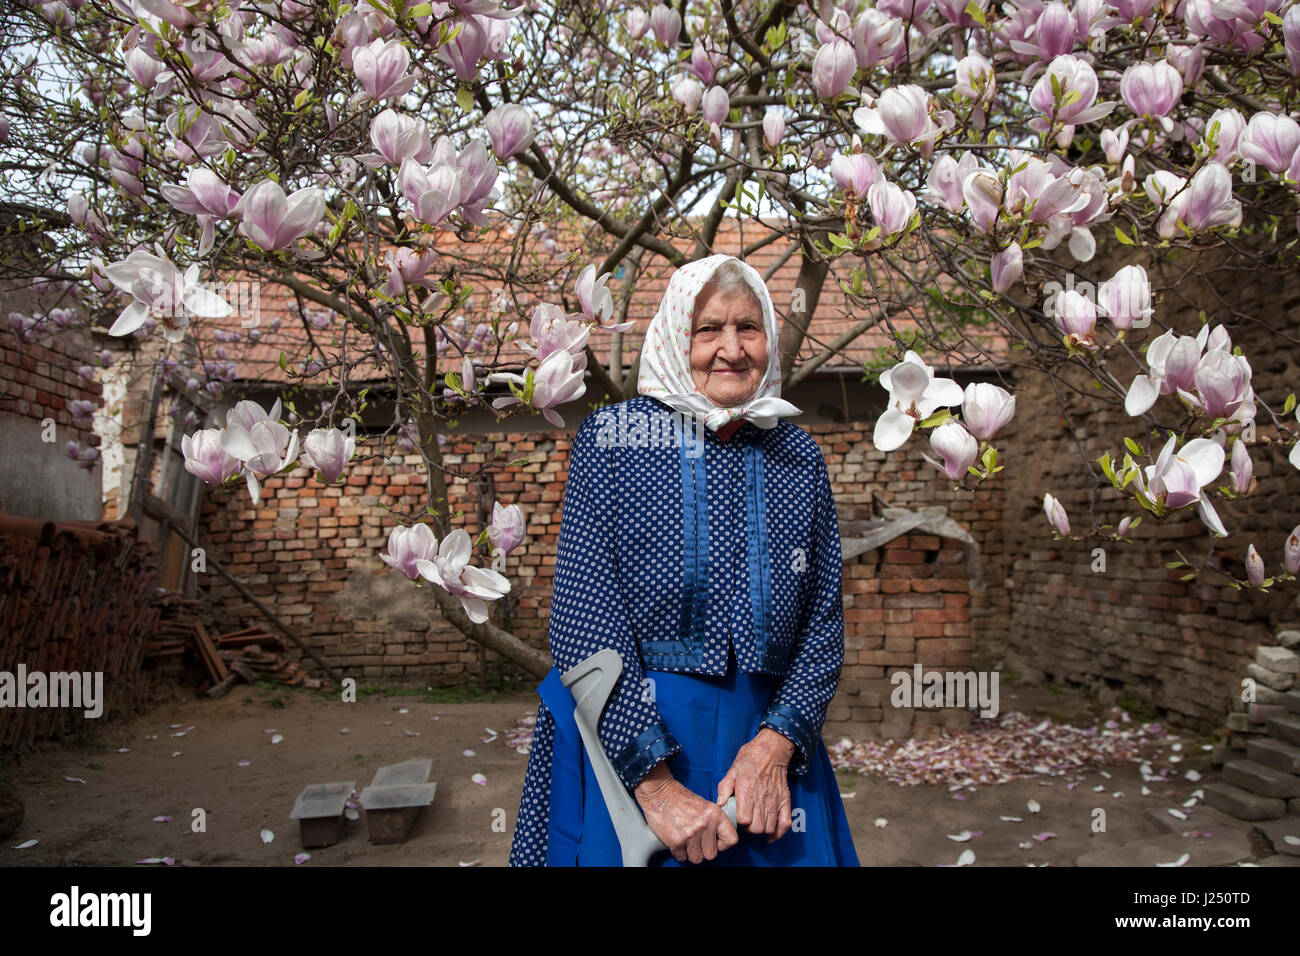 Old woman from the Moravian region of the Czech Republic stands in her garden Stock Photo